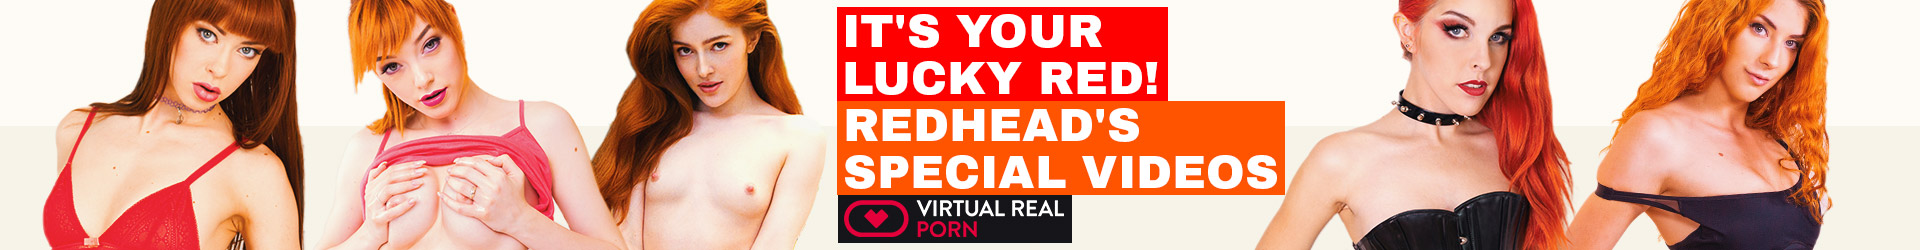 Redheads special videos 